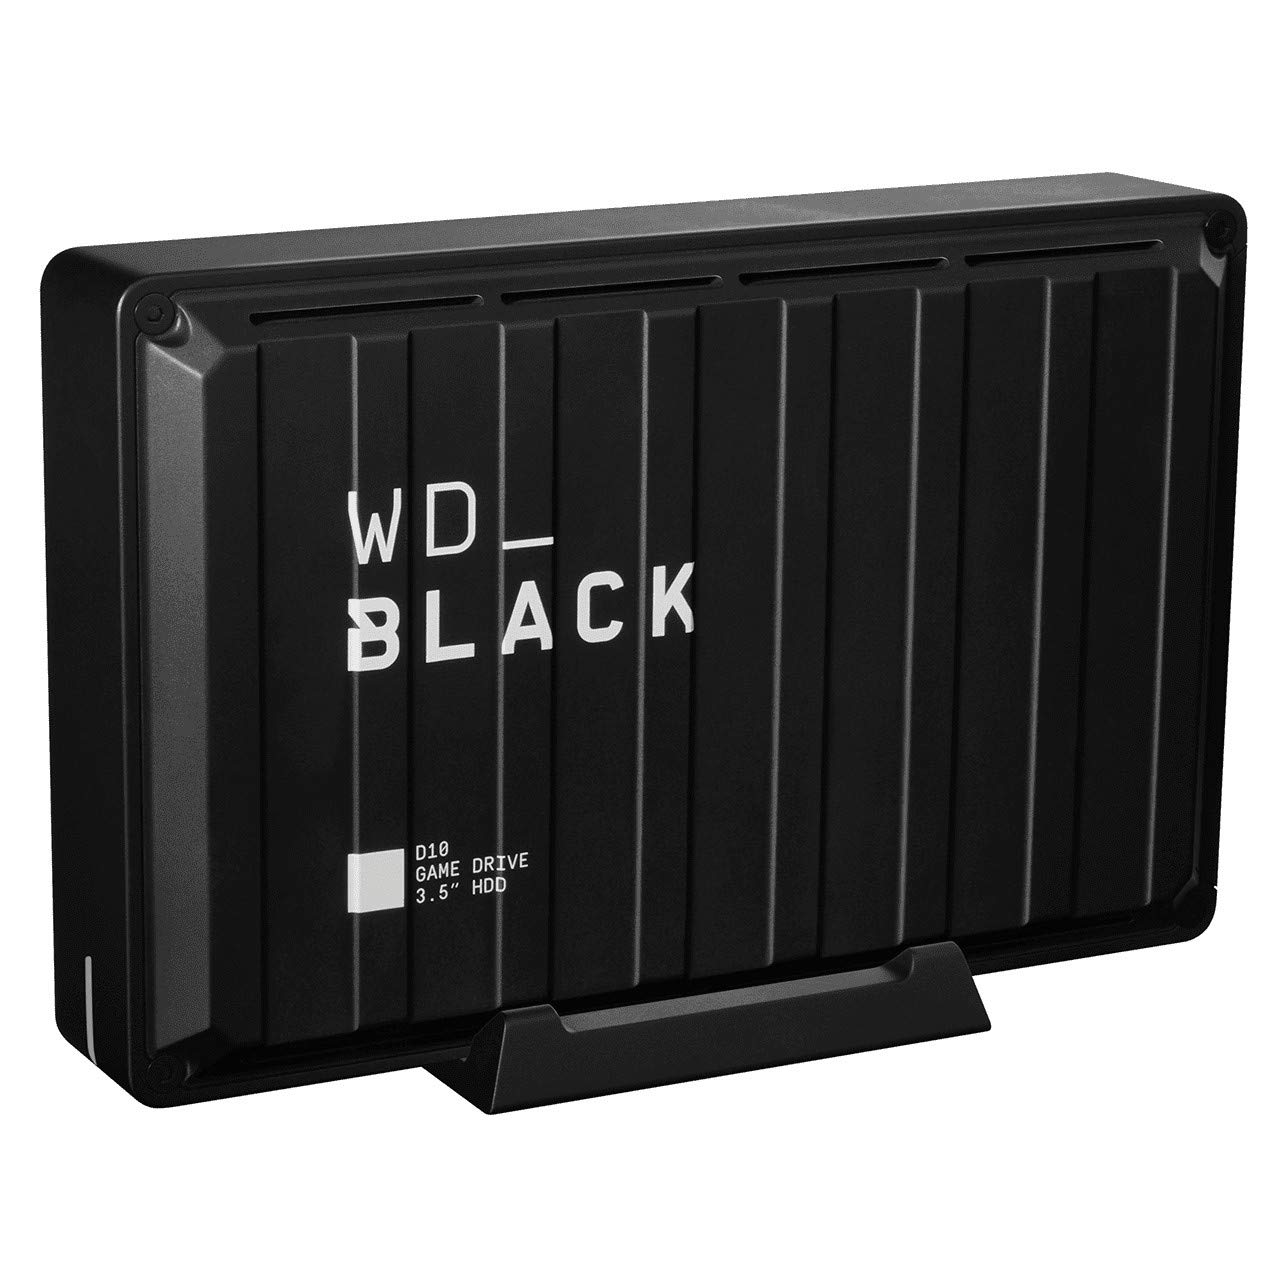 WD BLACK D10 GAME DRIVE